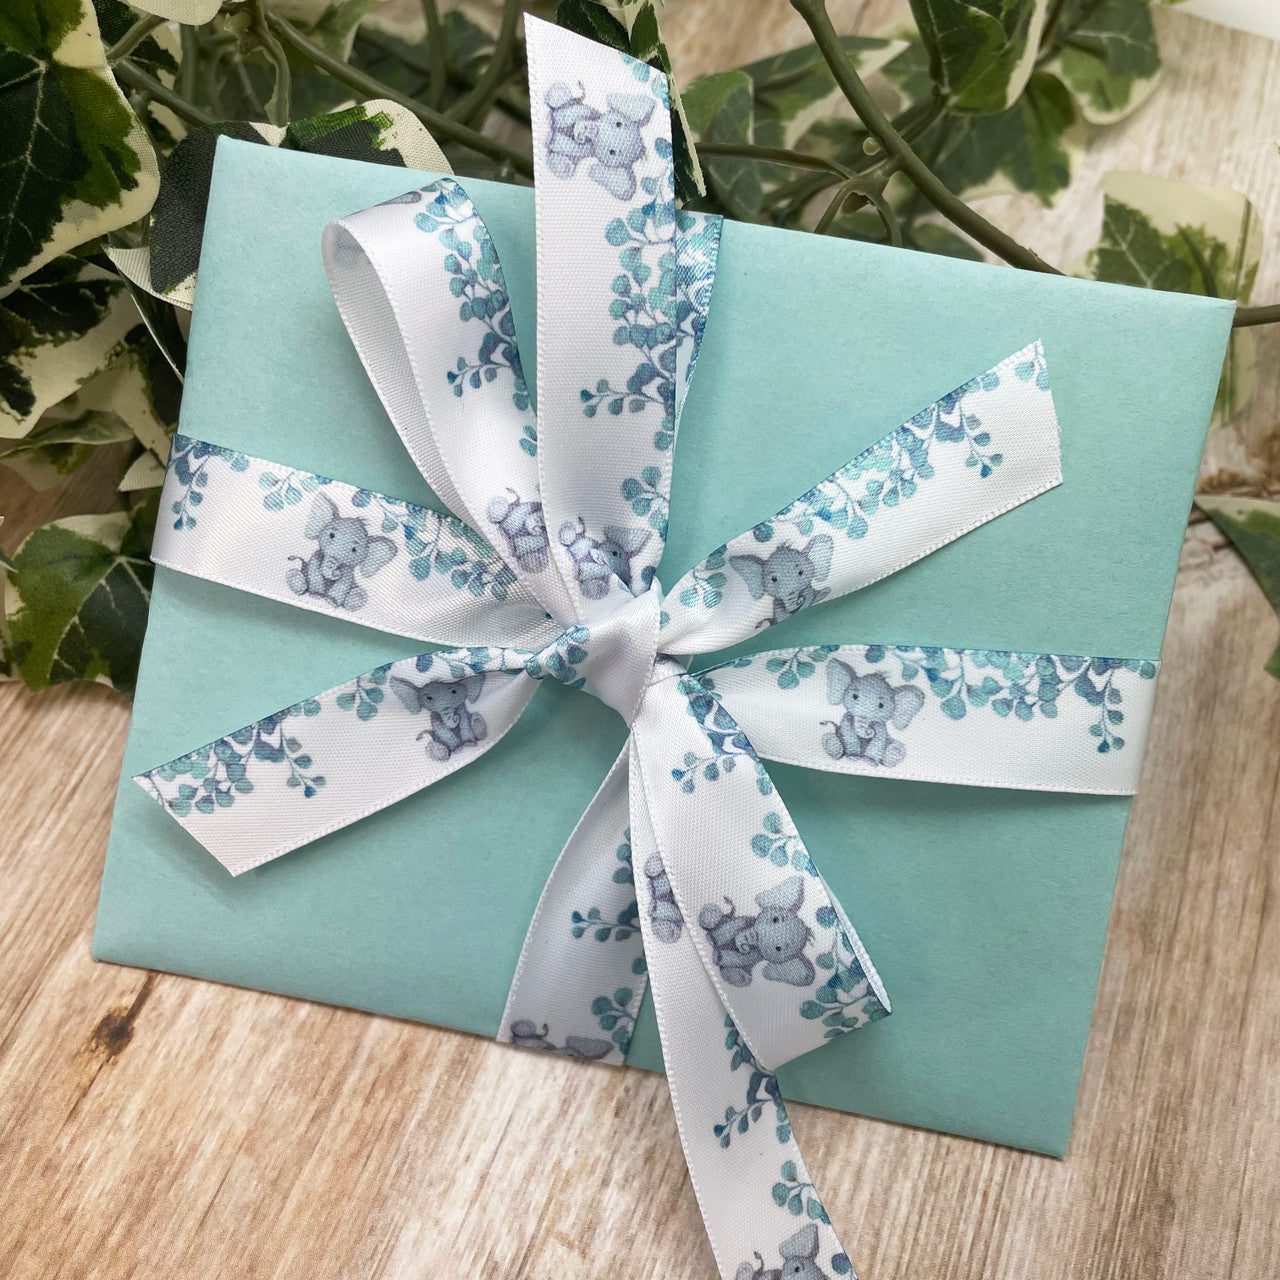 Tie a pretty bow on your baby shower gift card for the perfect presentation!